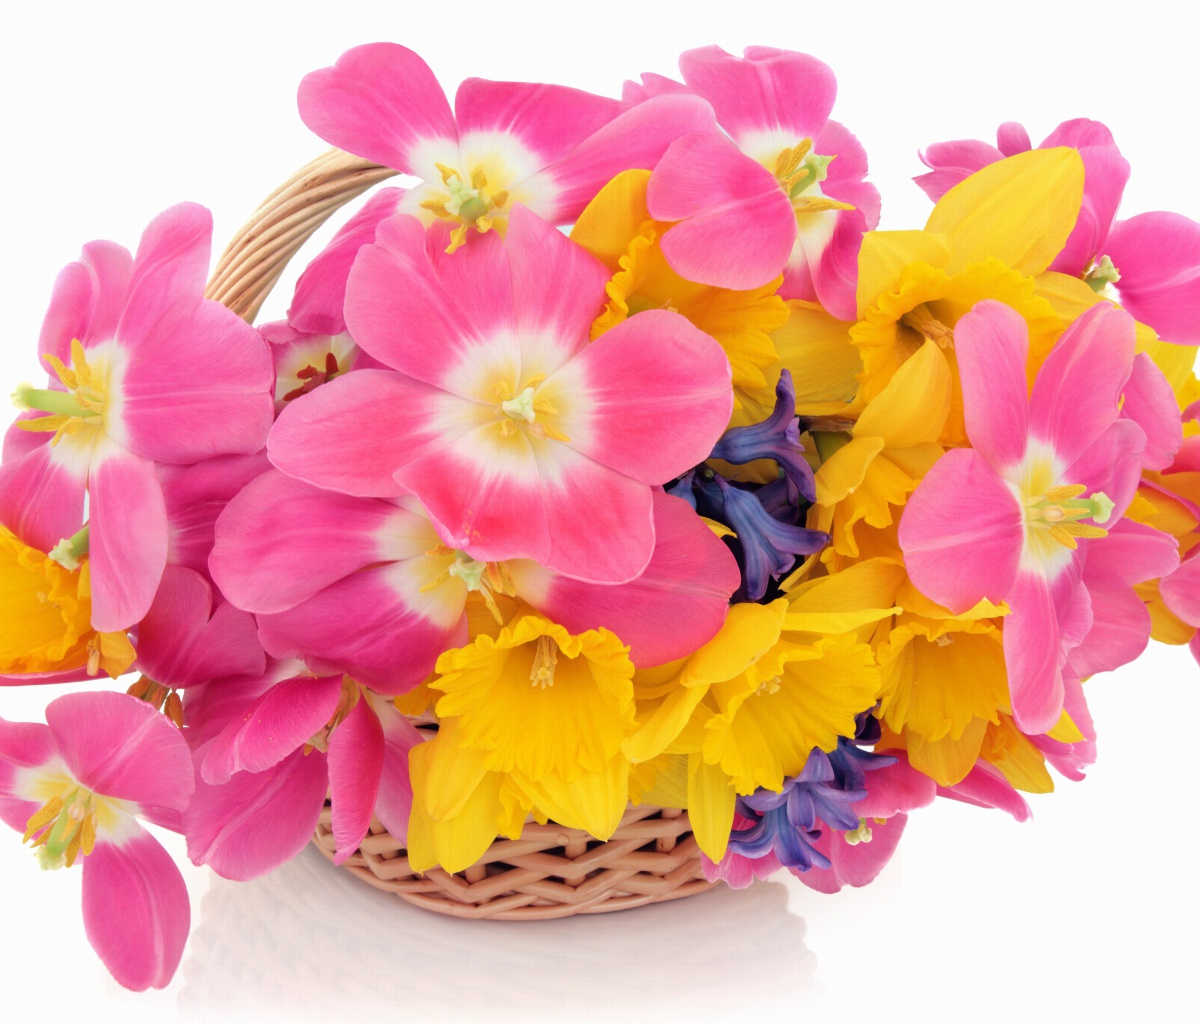 Das Indoor Basket of Tulips and Daffodils Wallpaper 1200x1024